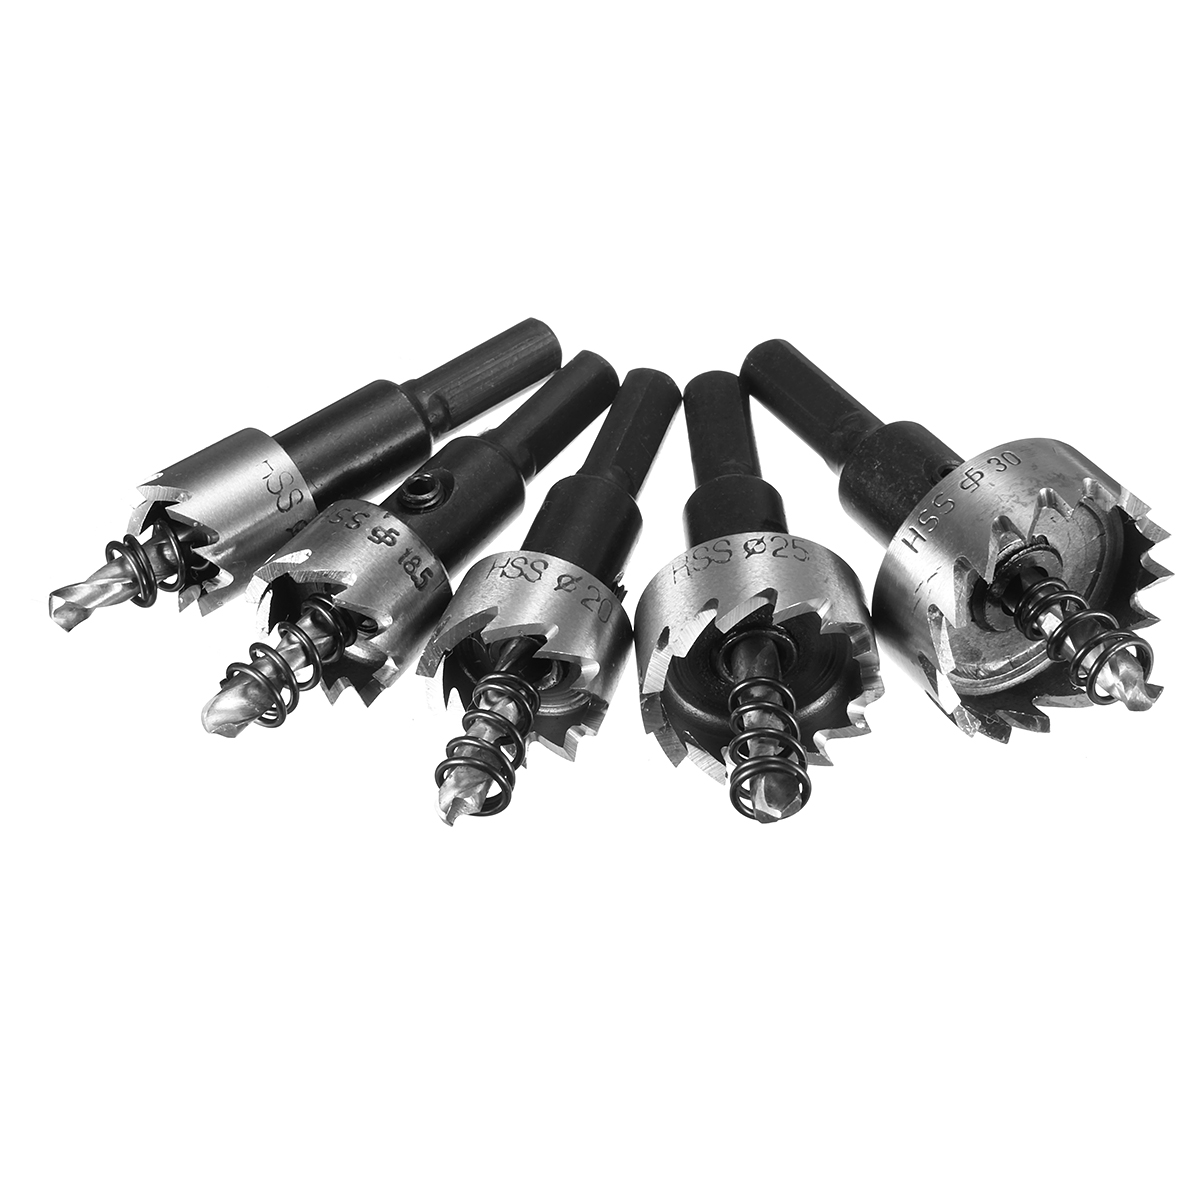 5Pcs-Saw-Tooth-HSS-Drill-Bit-Hole-Saw-Set-Stainless-Steel-Metal-Alloy-16-30mm-1203295-3